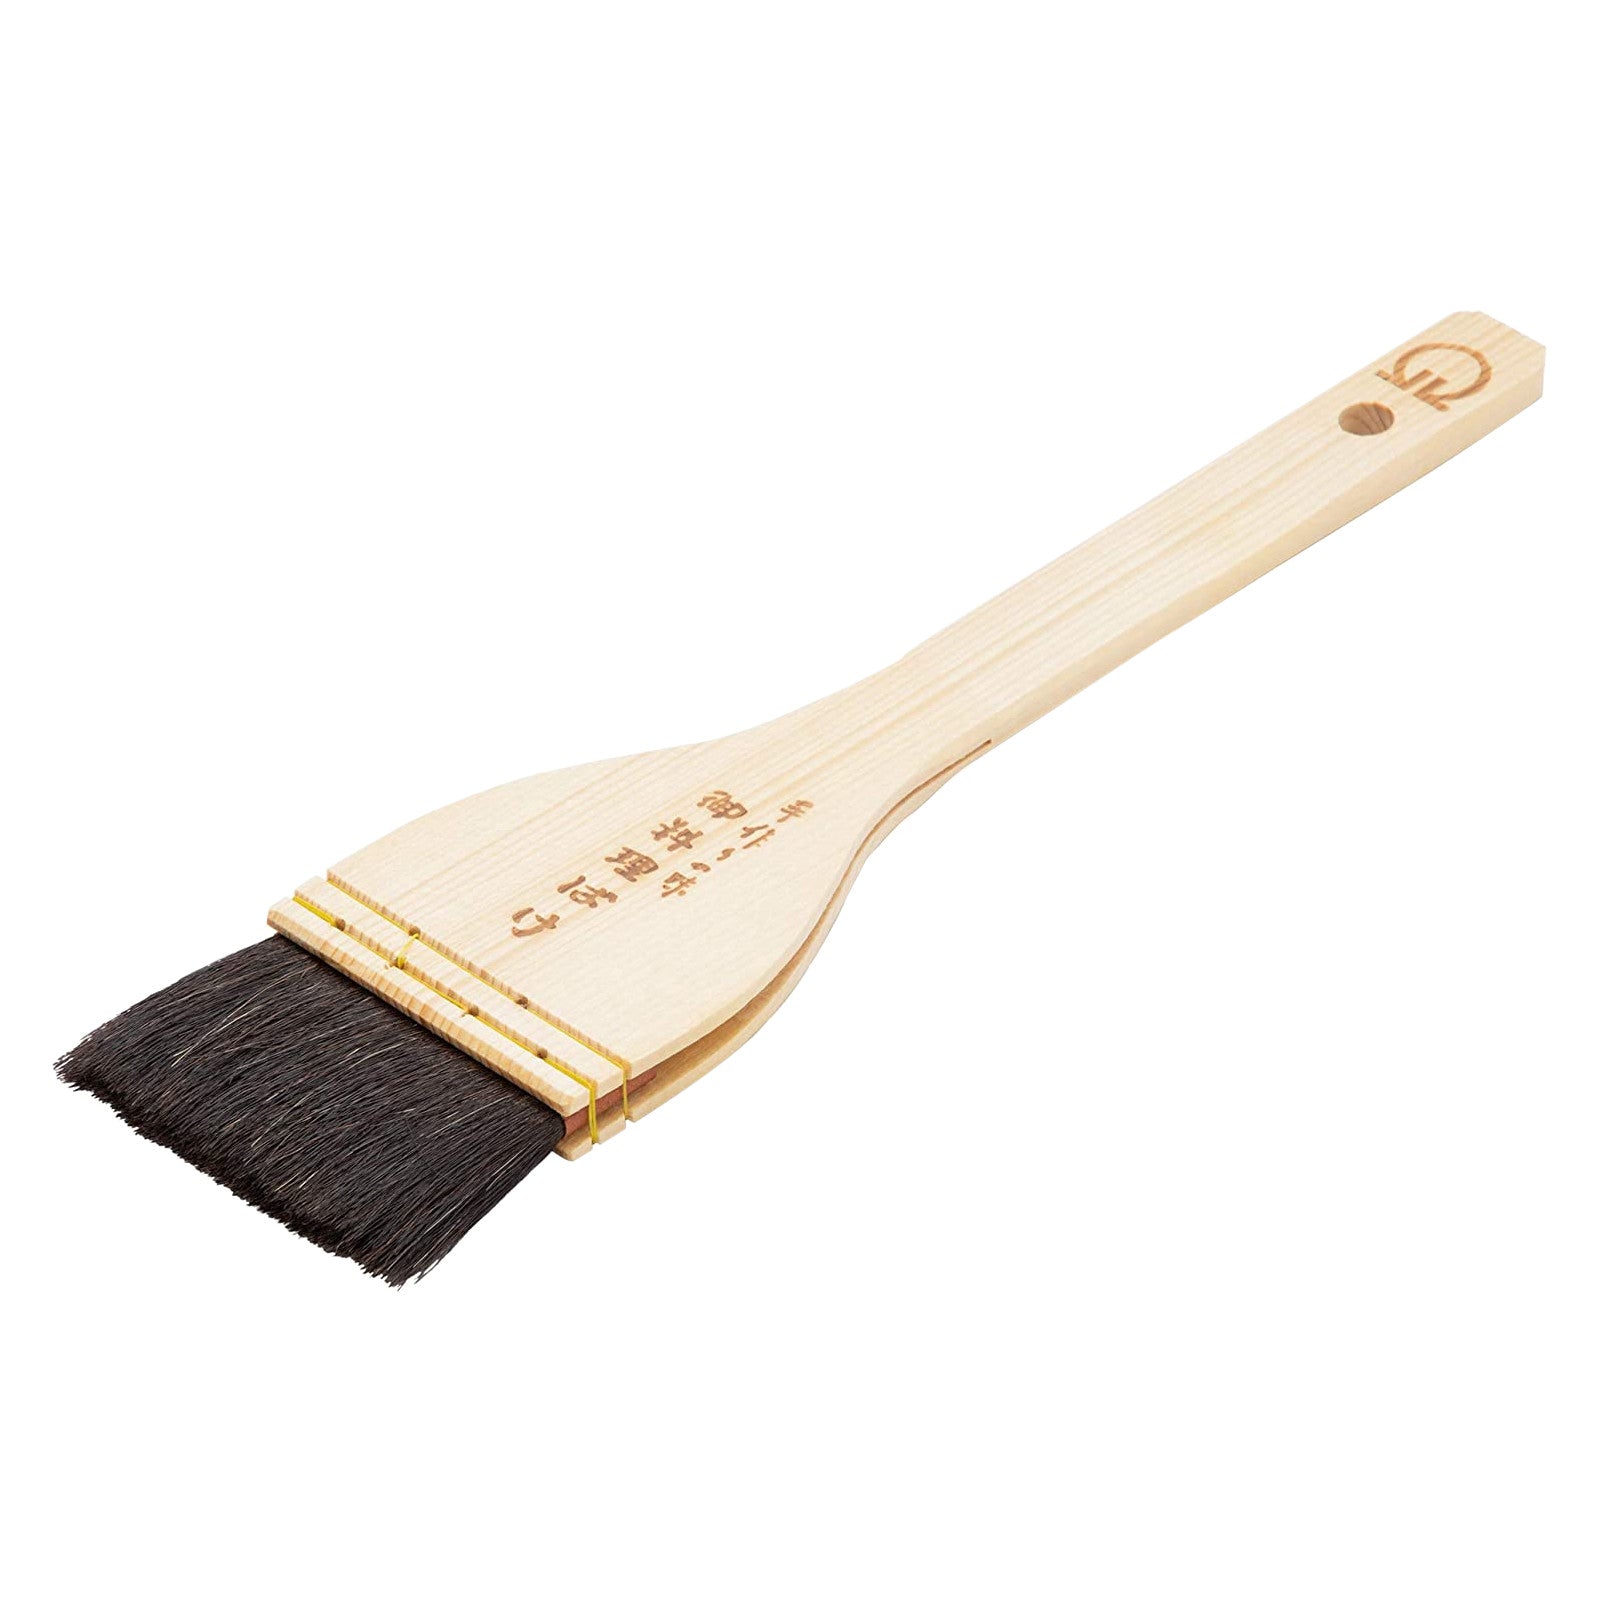 Goat Hair Bristle Pastry/Basting Brush with Wooden Handle